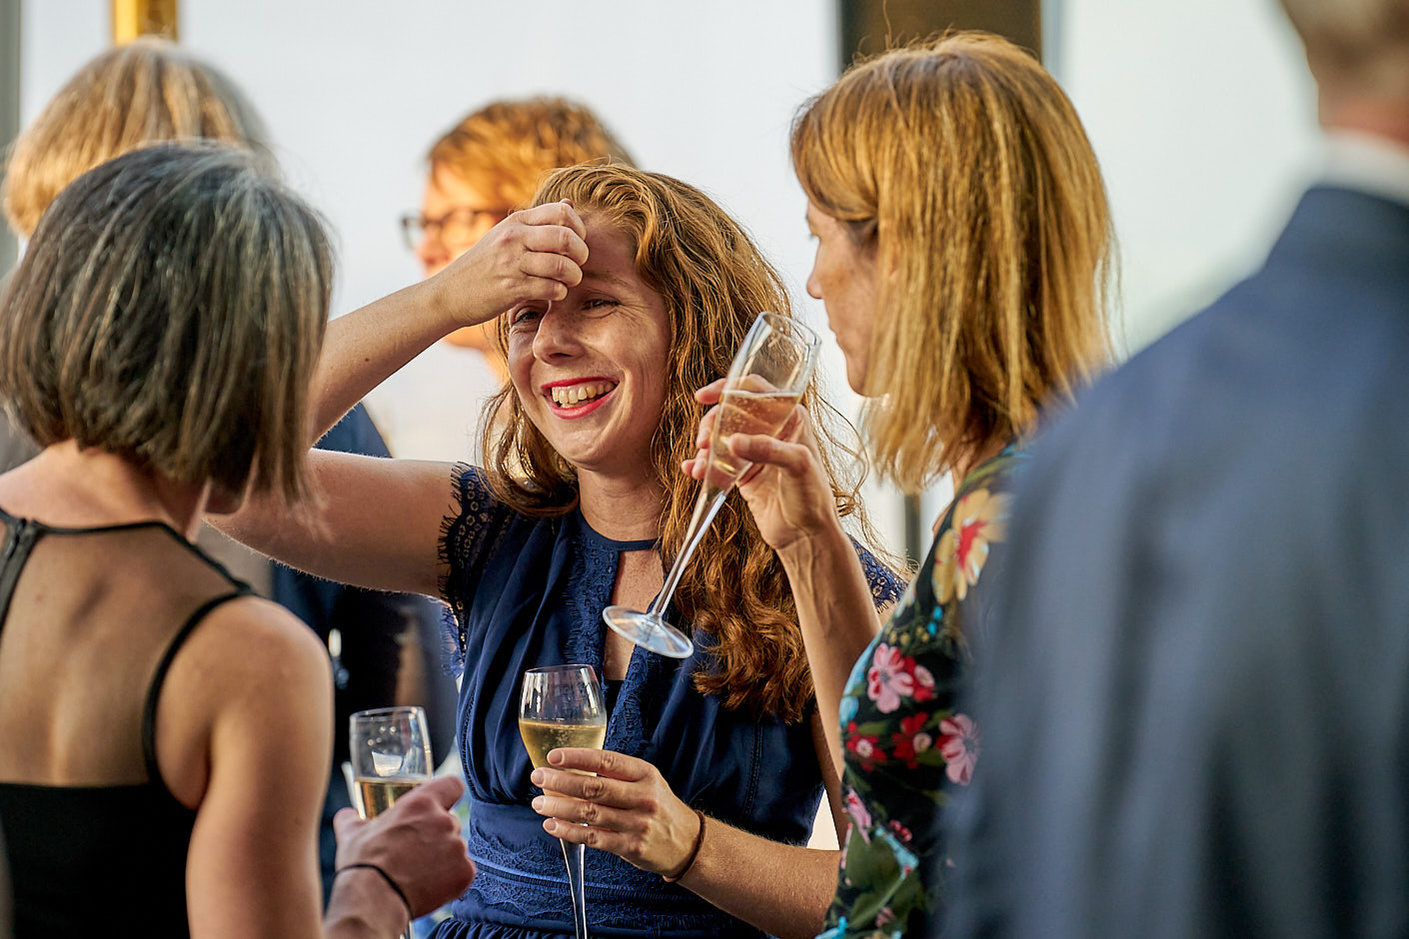 Nice unposed shots of the event at a corporate award ceremony and drinks reception at The Shard, London.